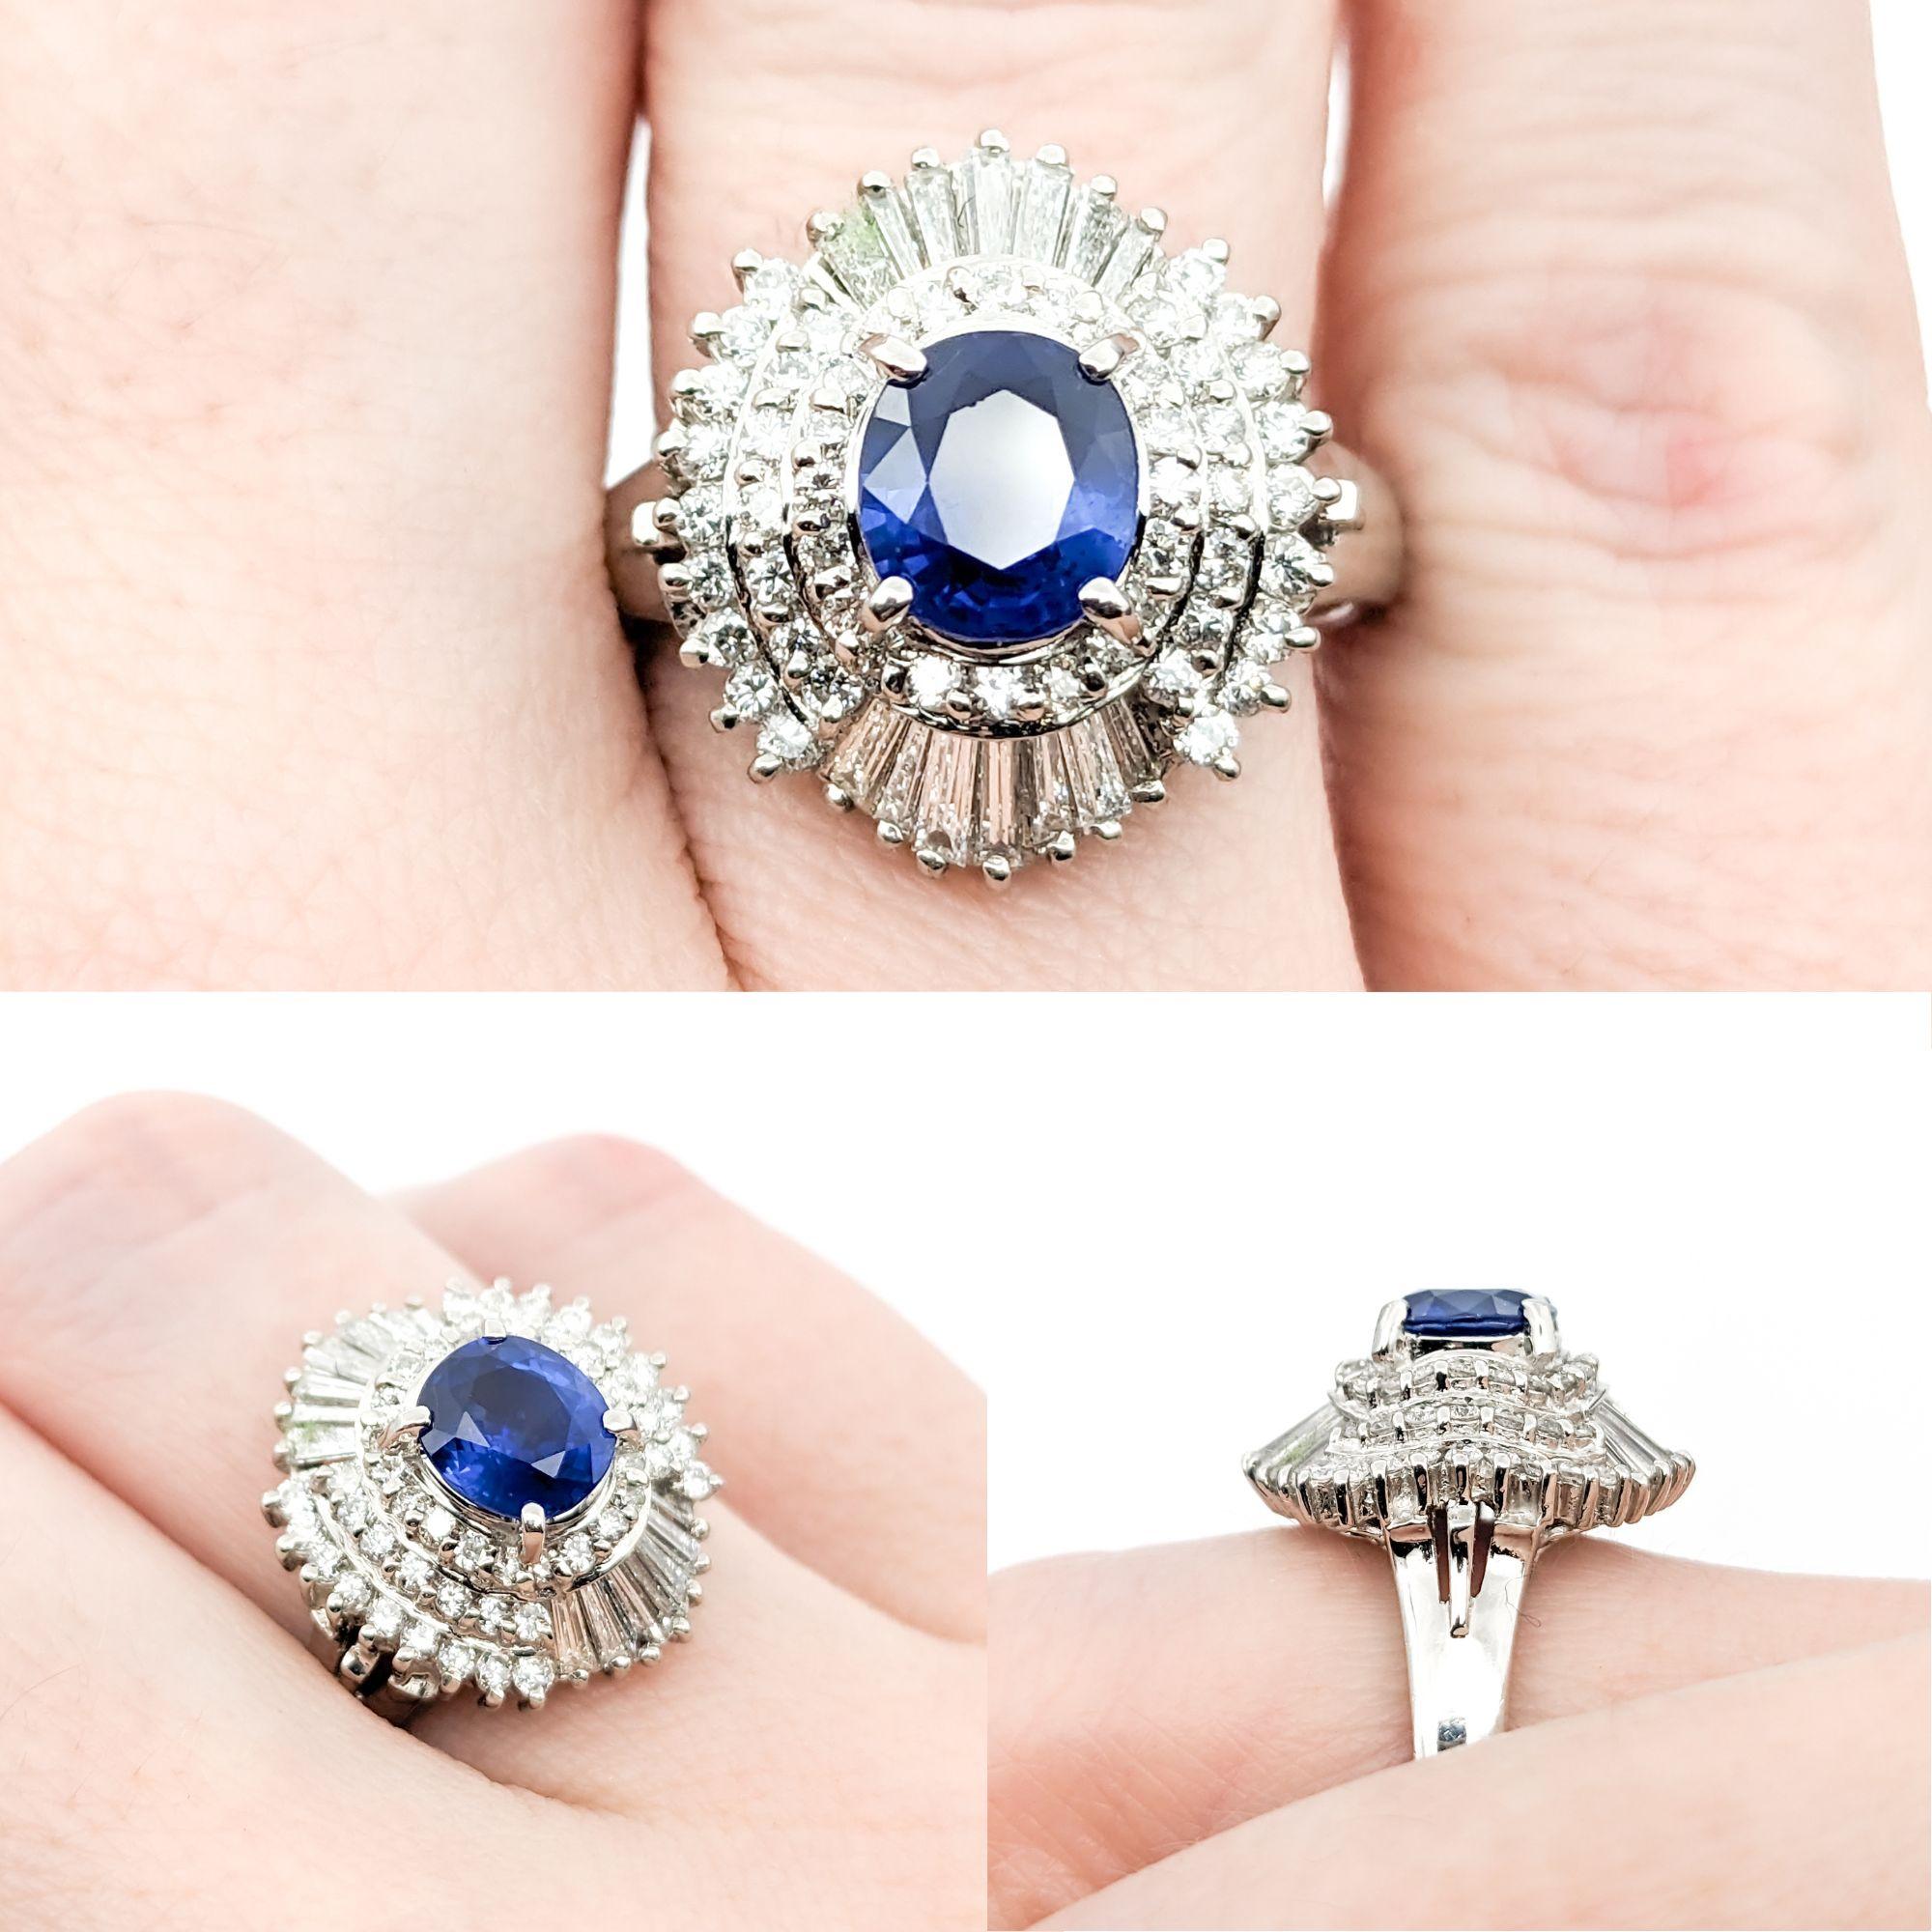 1.06ct Blue Sapphire & .85ctw Diamond Ring In Platinum

This exquisite ring is crafted from 900 platinum and showcases a stunning 1.06ct sapphire centerpiece. It is beautifully complemented by 0.85ctw of round and baguette diamonds that boast SI